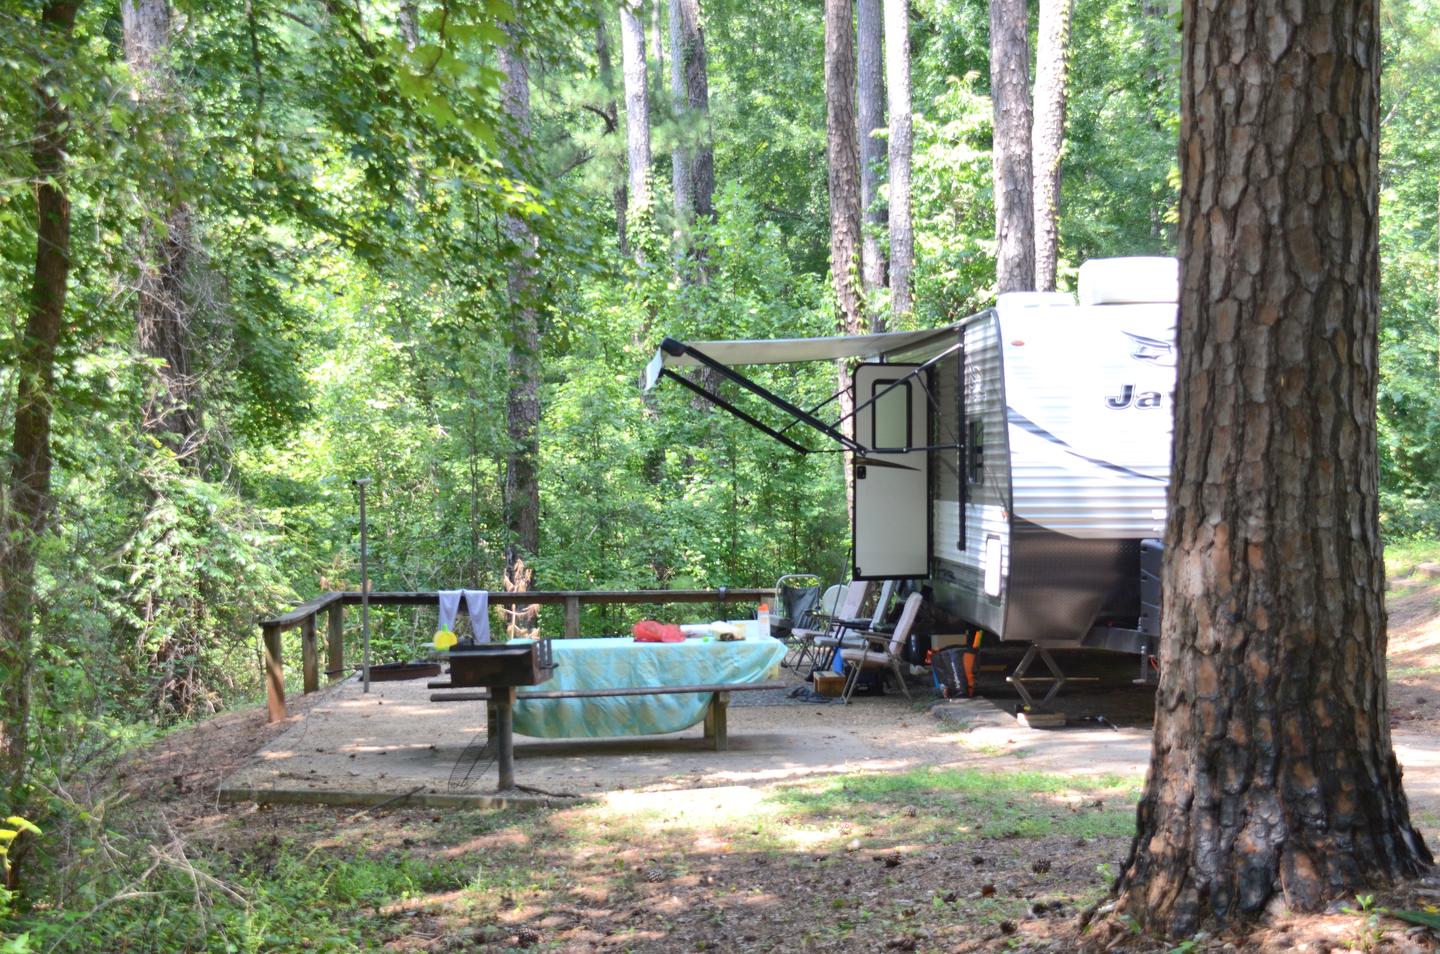 Awning-side clearance, campsite view..Sweetwater Campground, campsite 4.